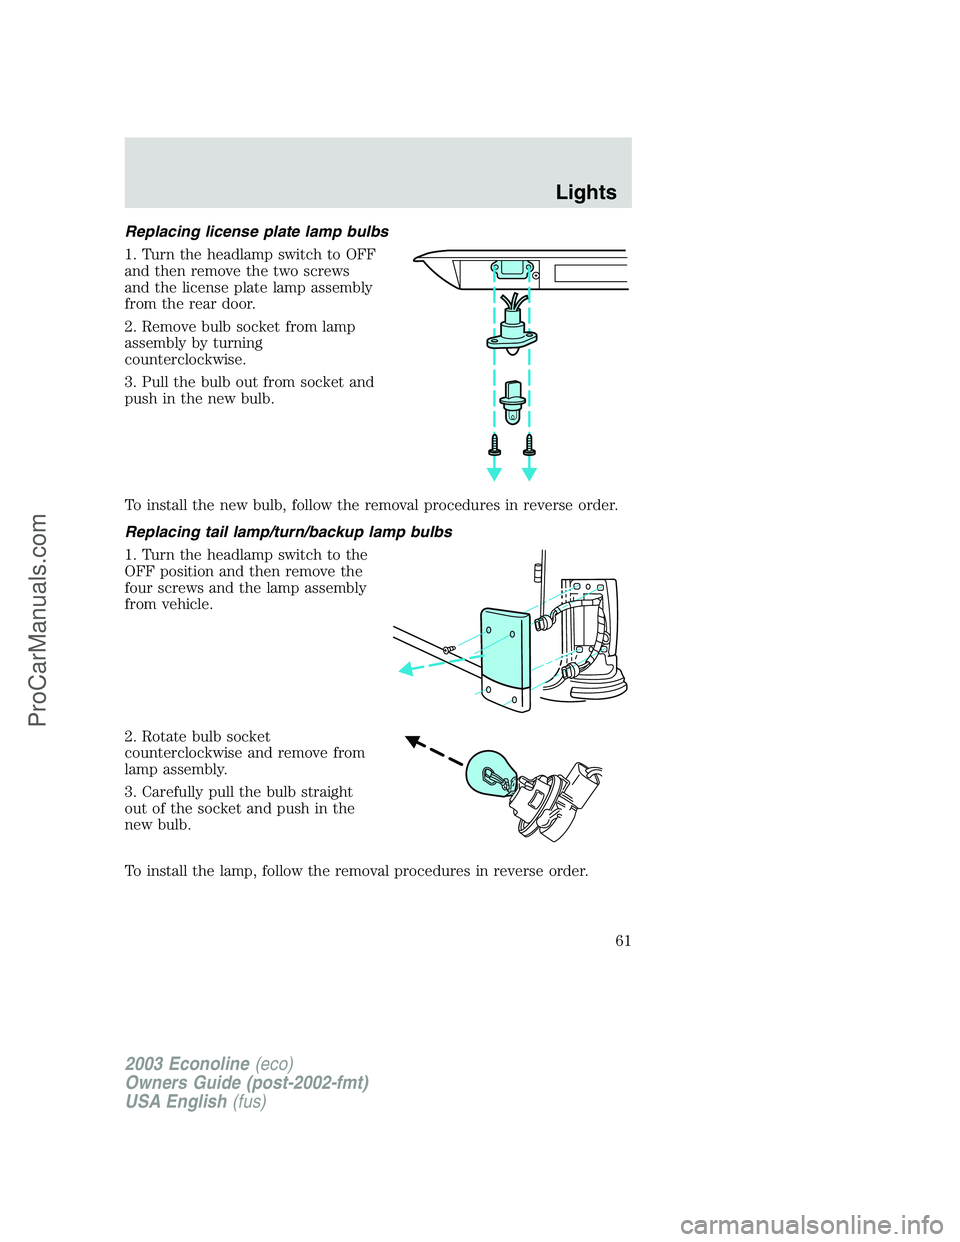 FORD E-150 2003  Owners Manual Replacing license plate lamp bulbs
1. Turn the headlamp switch to OFF
and then remove the two screws
and the license plate lamp assembly
from the rear door.
2. Remove bulb socket from lamp
assembly by